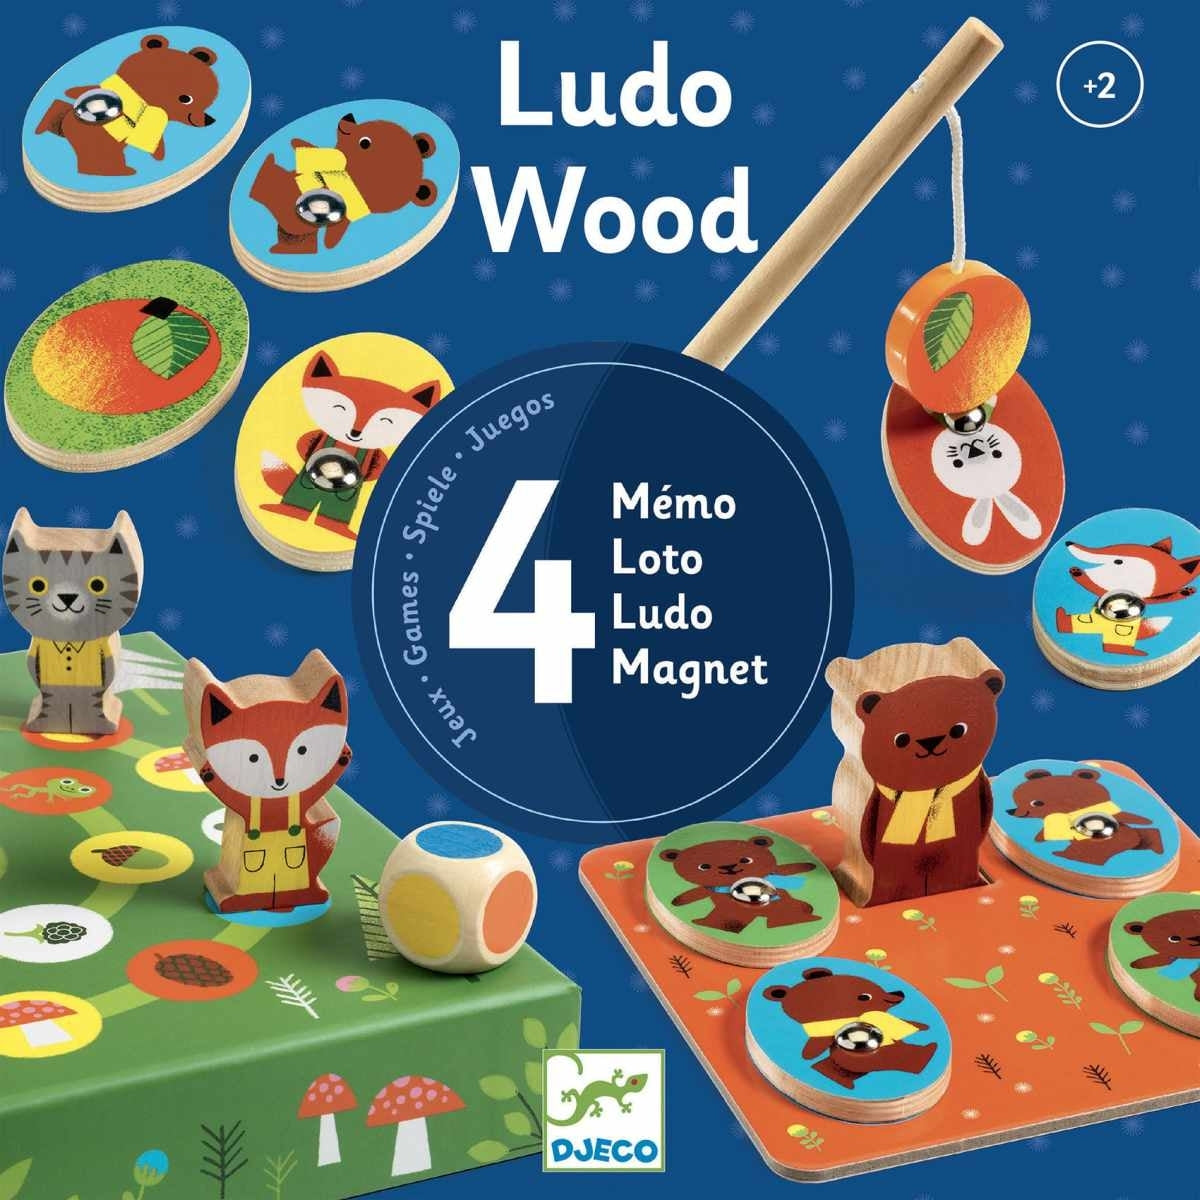 Ludo Wood - 4 Games in 1